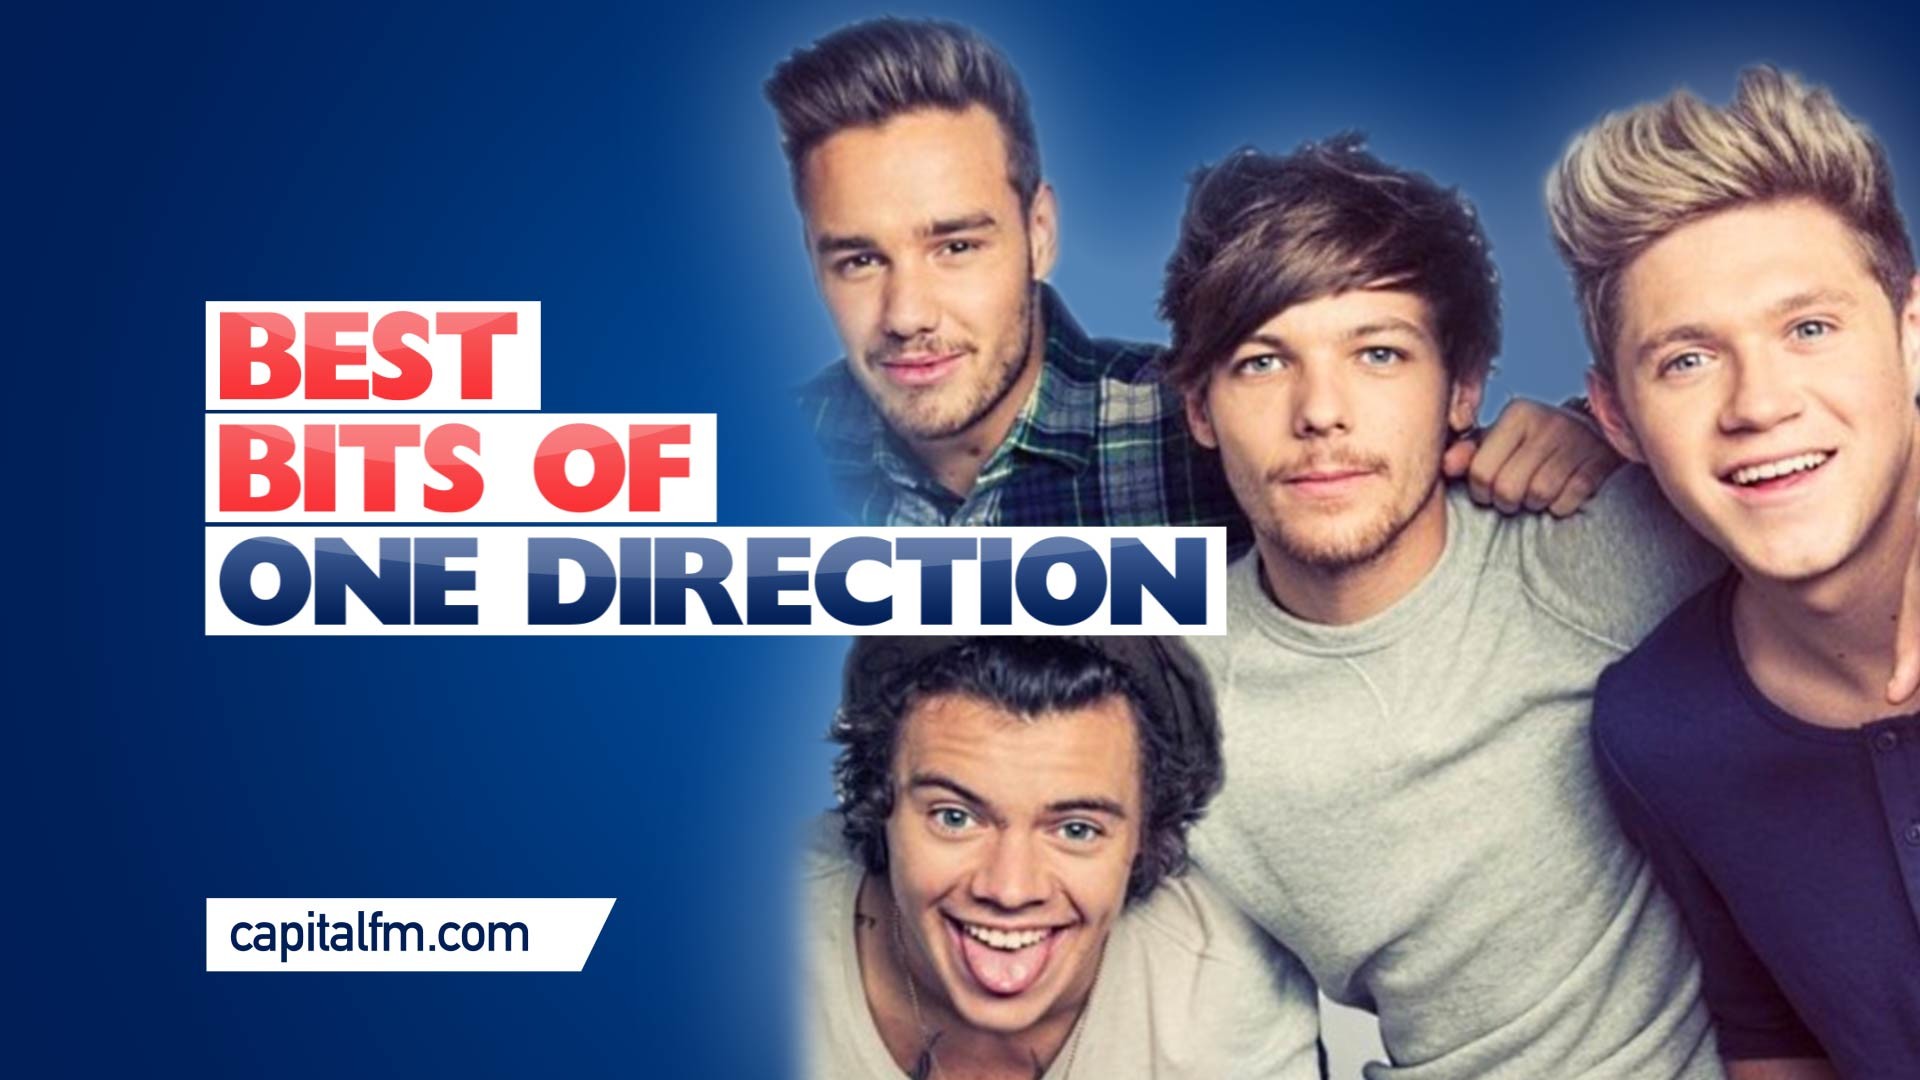 1920x1080 WATCH: One Direction's Best Bits